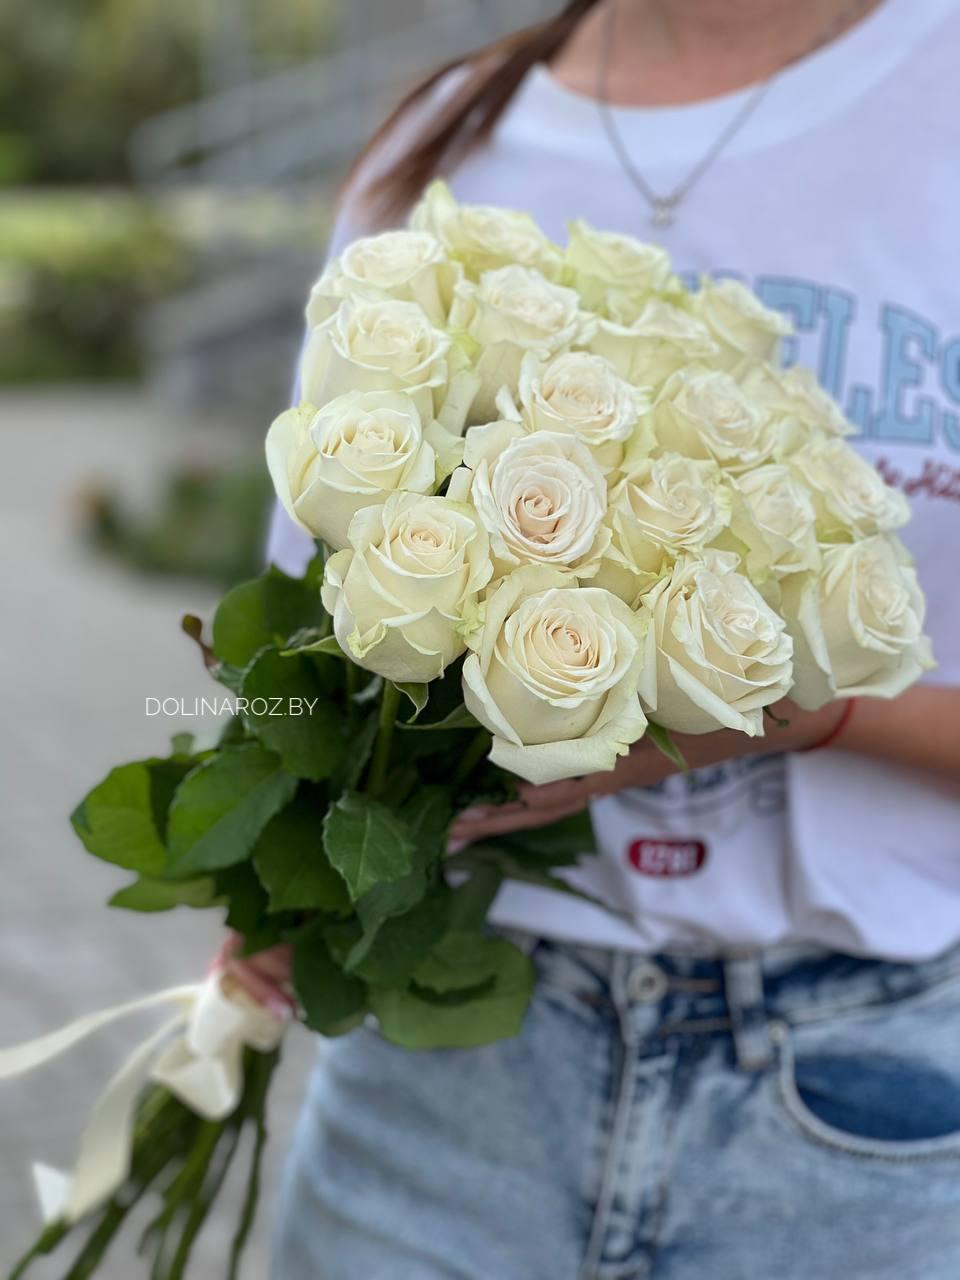 Bouquet of roses "White nights"